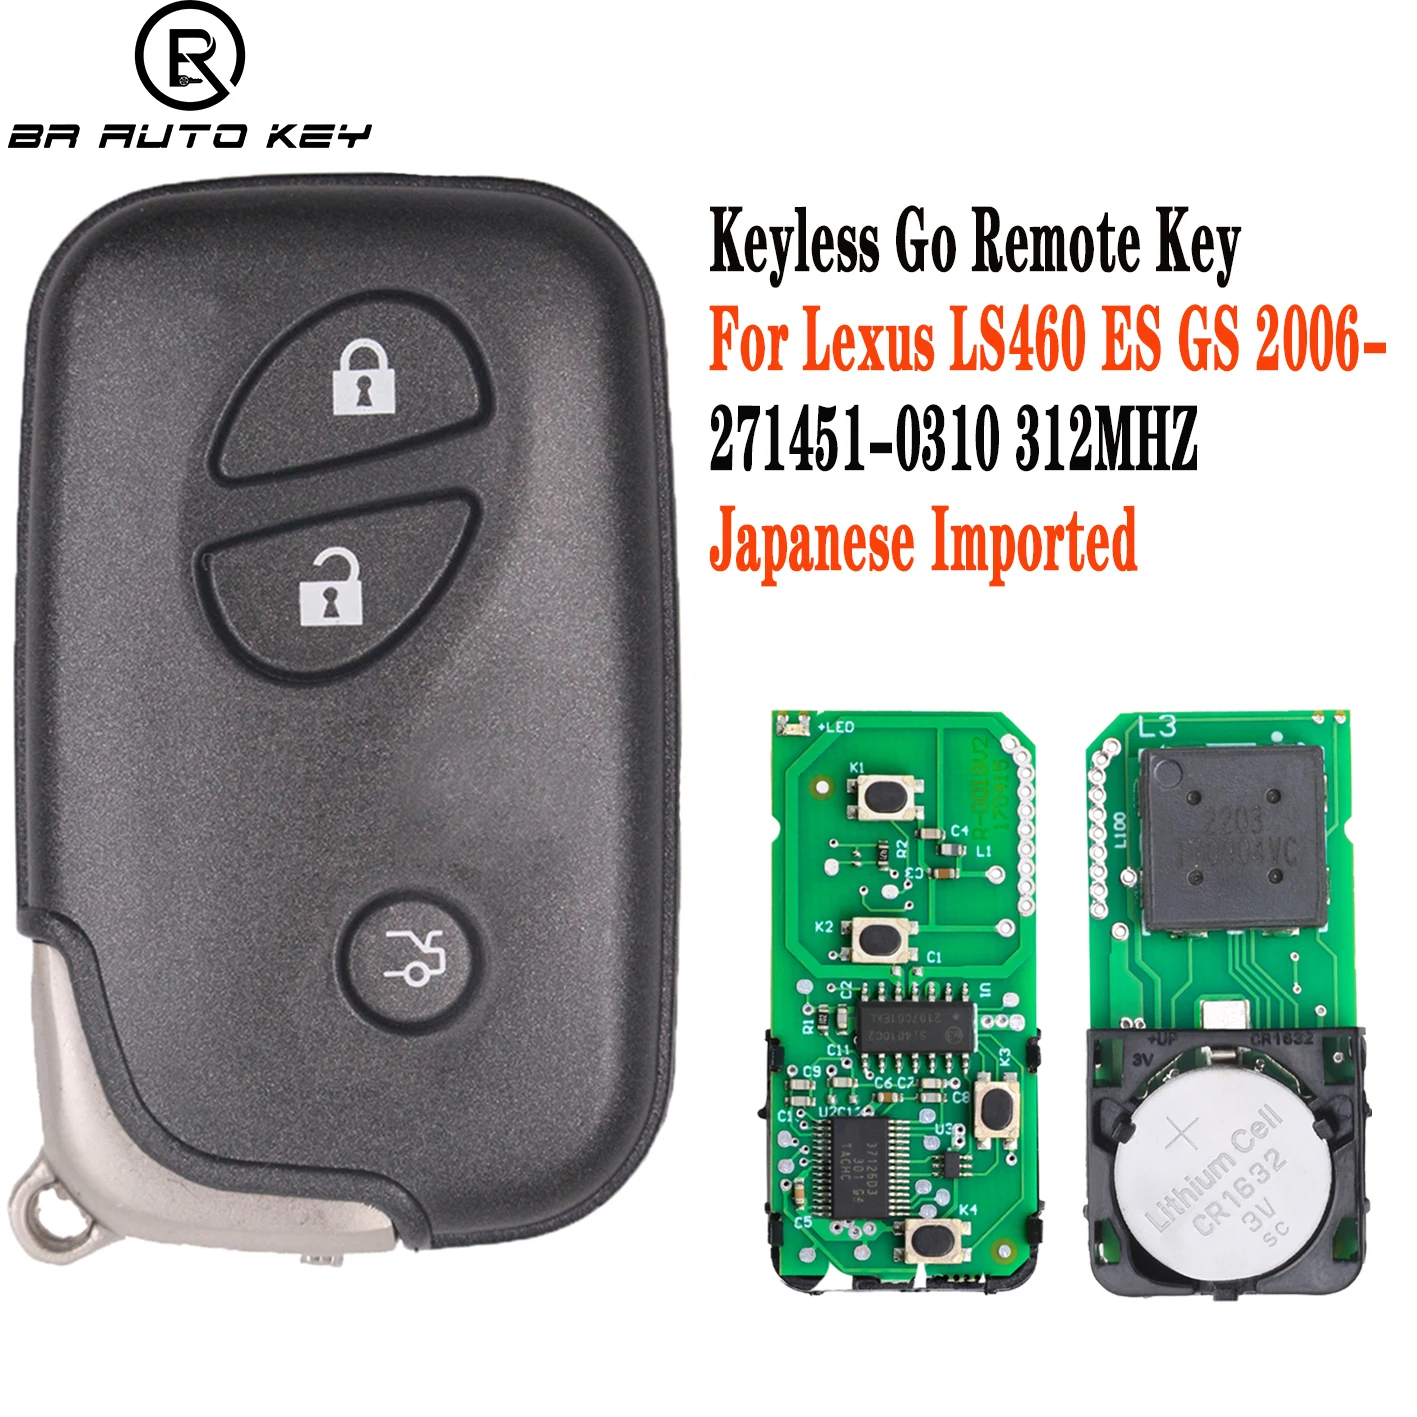 Aftermarket 3Button Smart Remote Key Fob For Lexus LS460 GS ES 2005-2012 312MHz With 4D Chip Board No:271451-0310 89904-30332